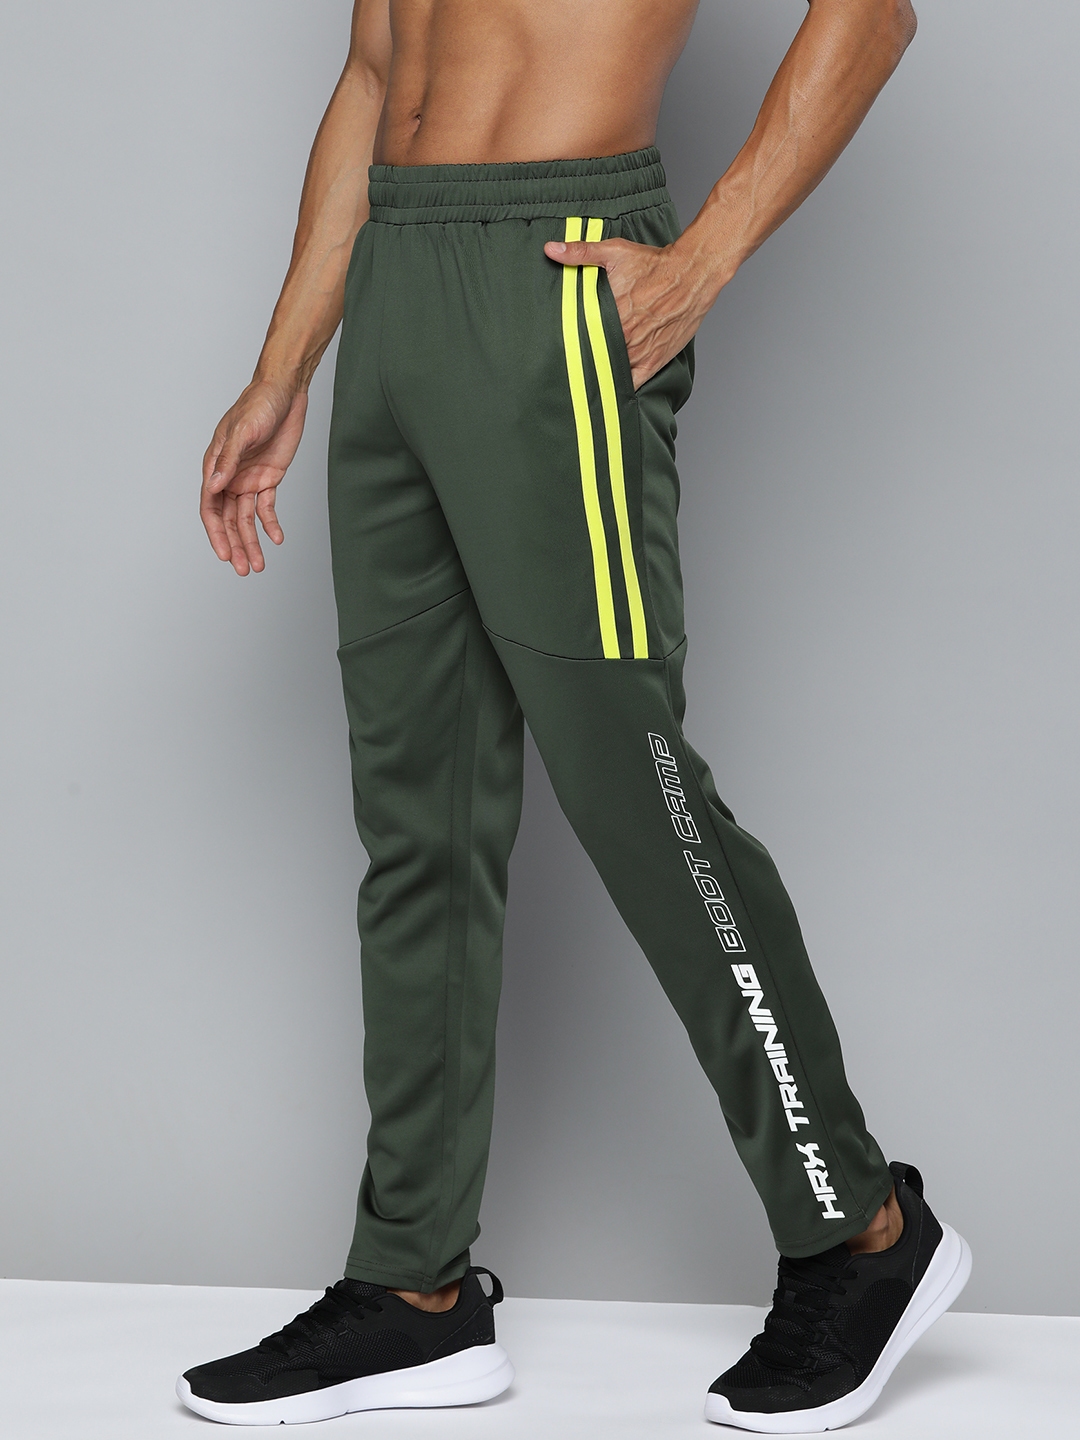 HRX joggers Olive Green track pants for men